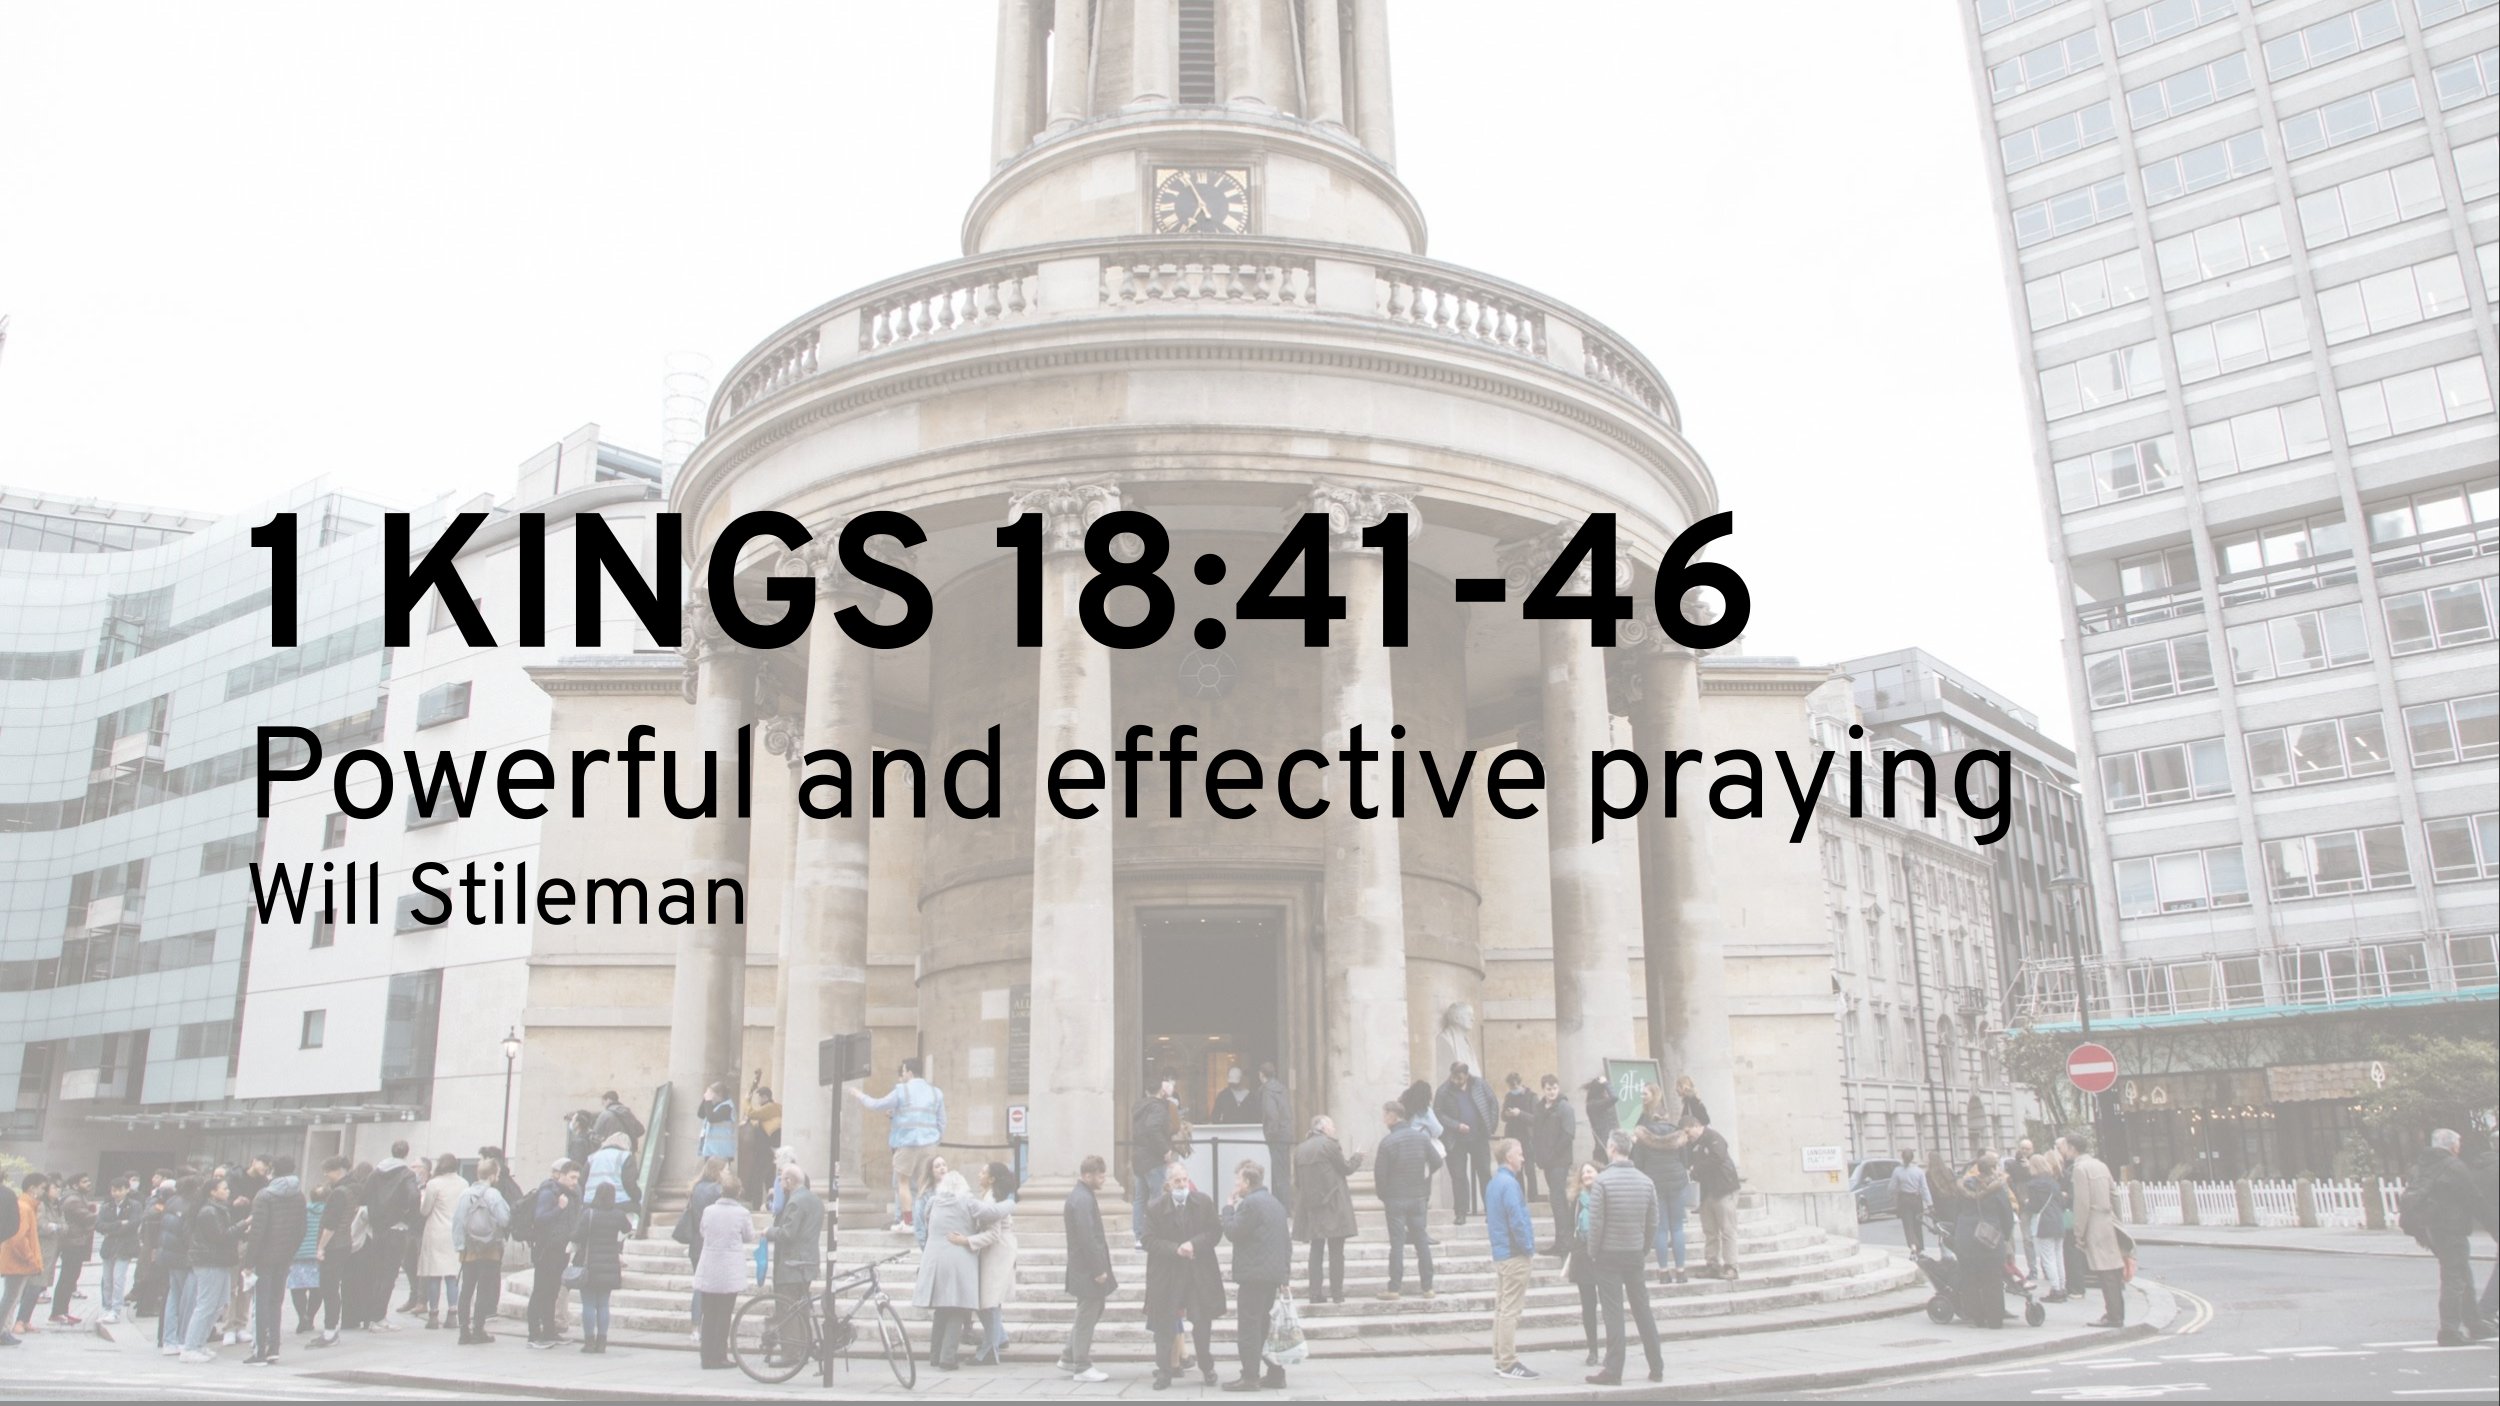 Powerful and effective praying